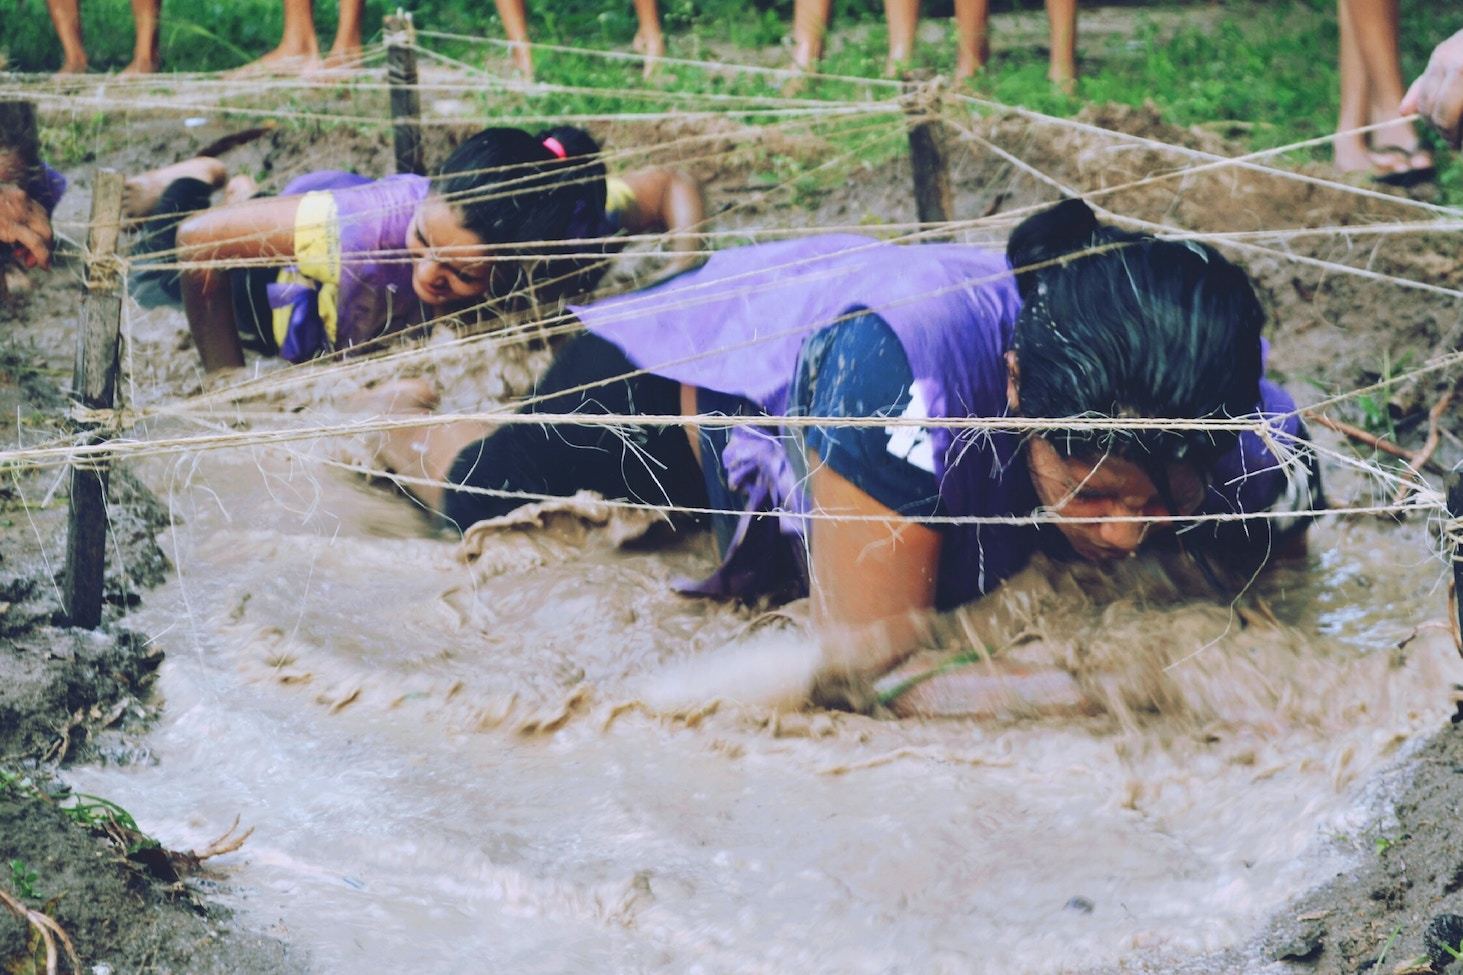 Women crawl through a muddy obstacle course